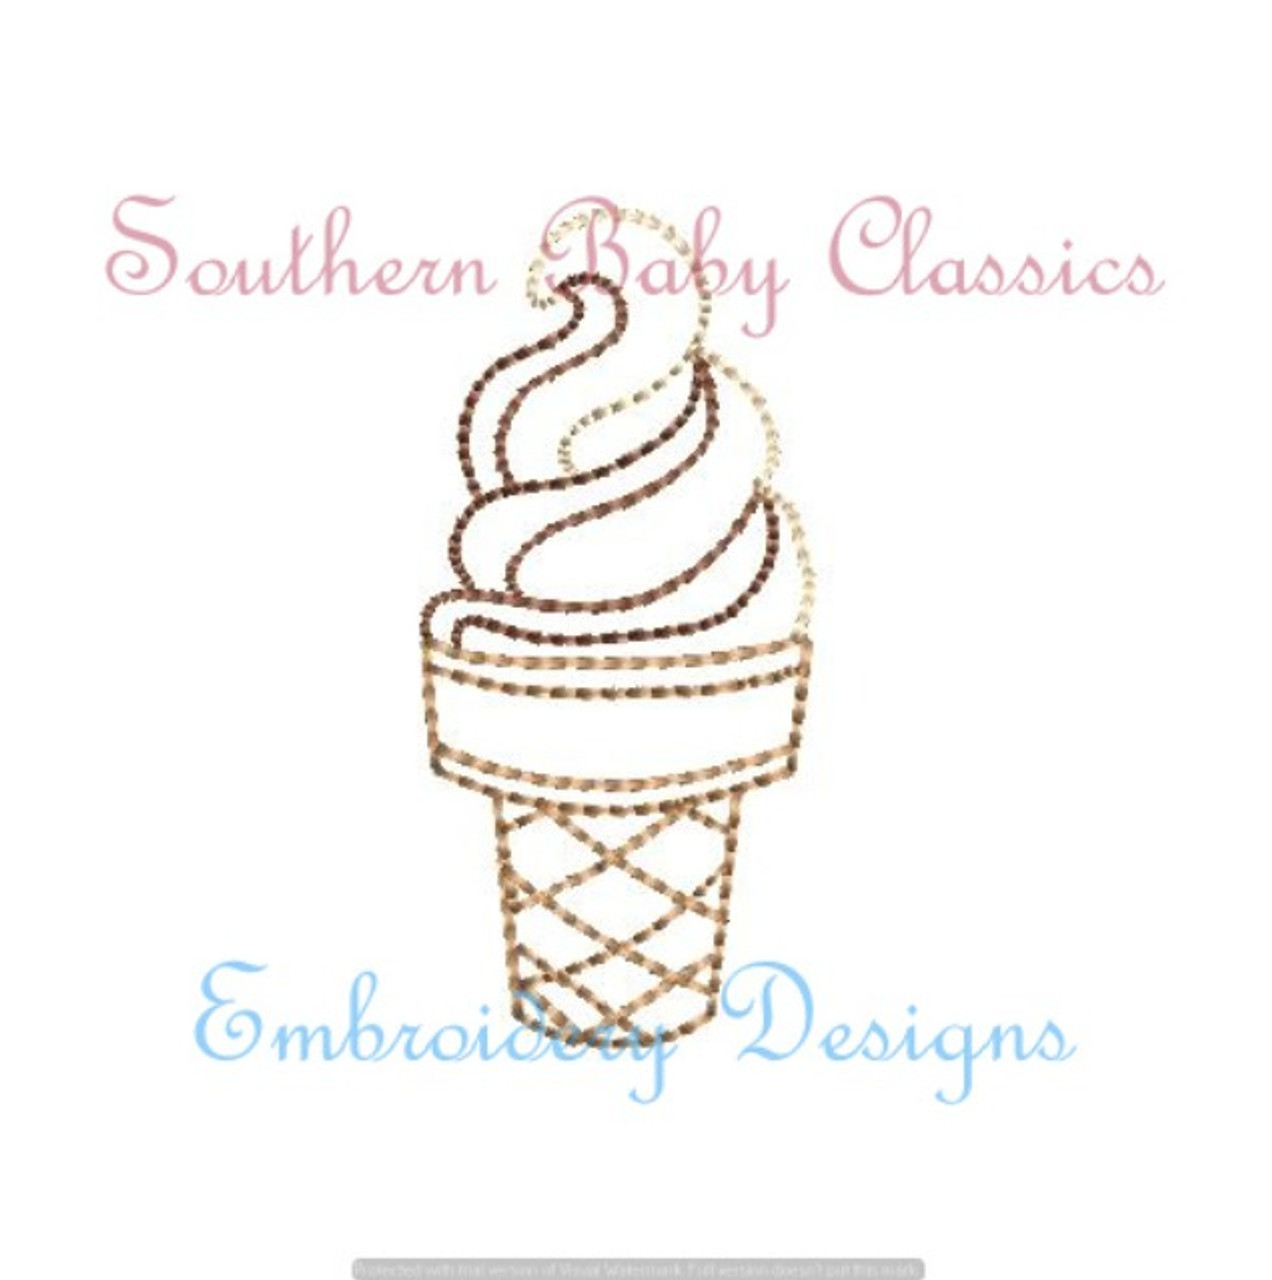 DSF pin backs without ice cream cone pattern?